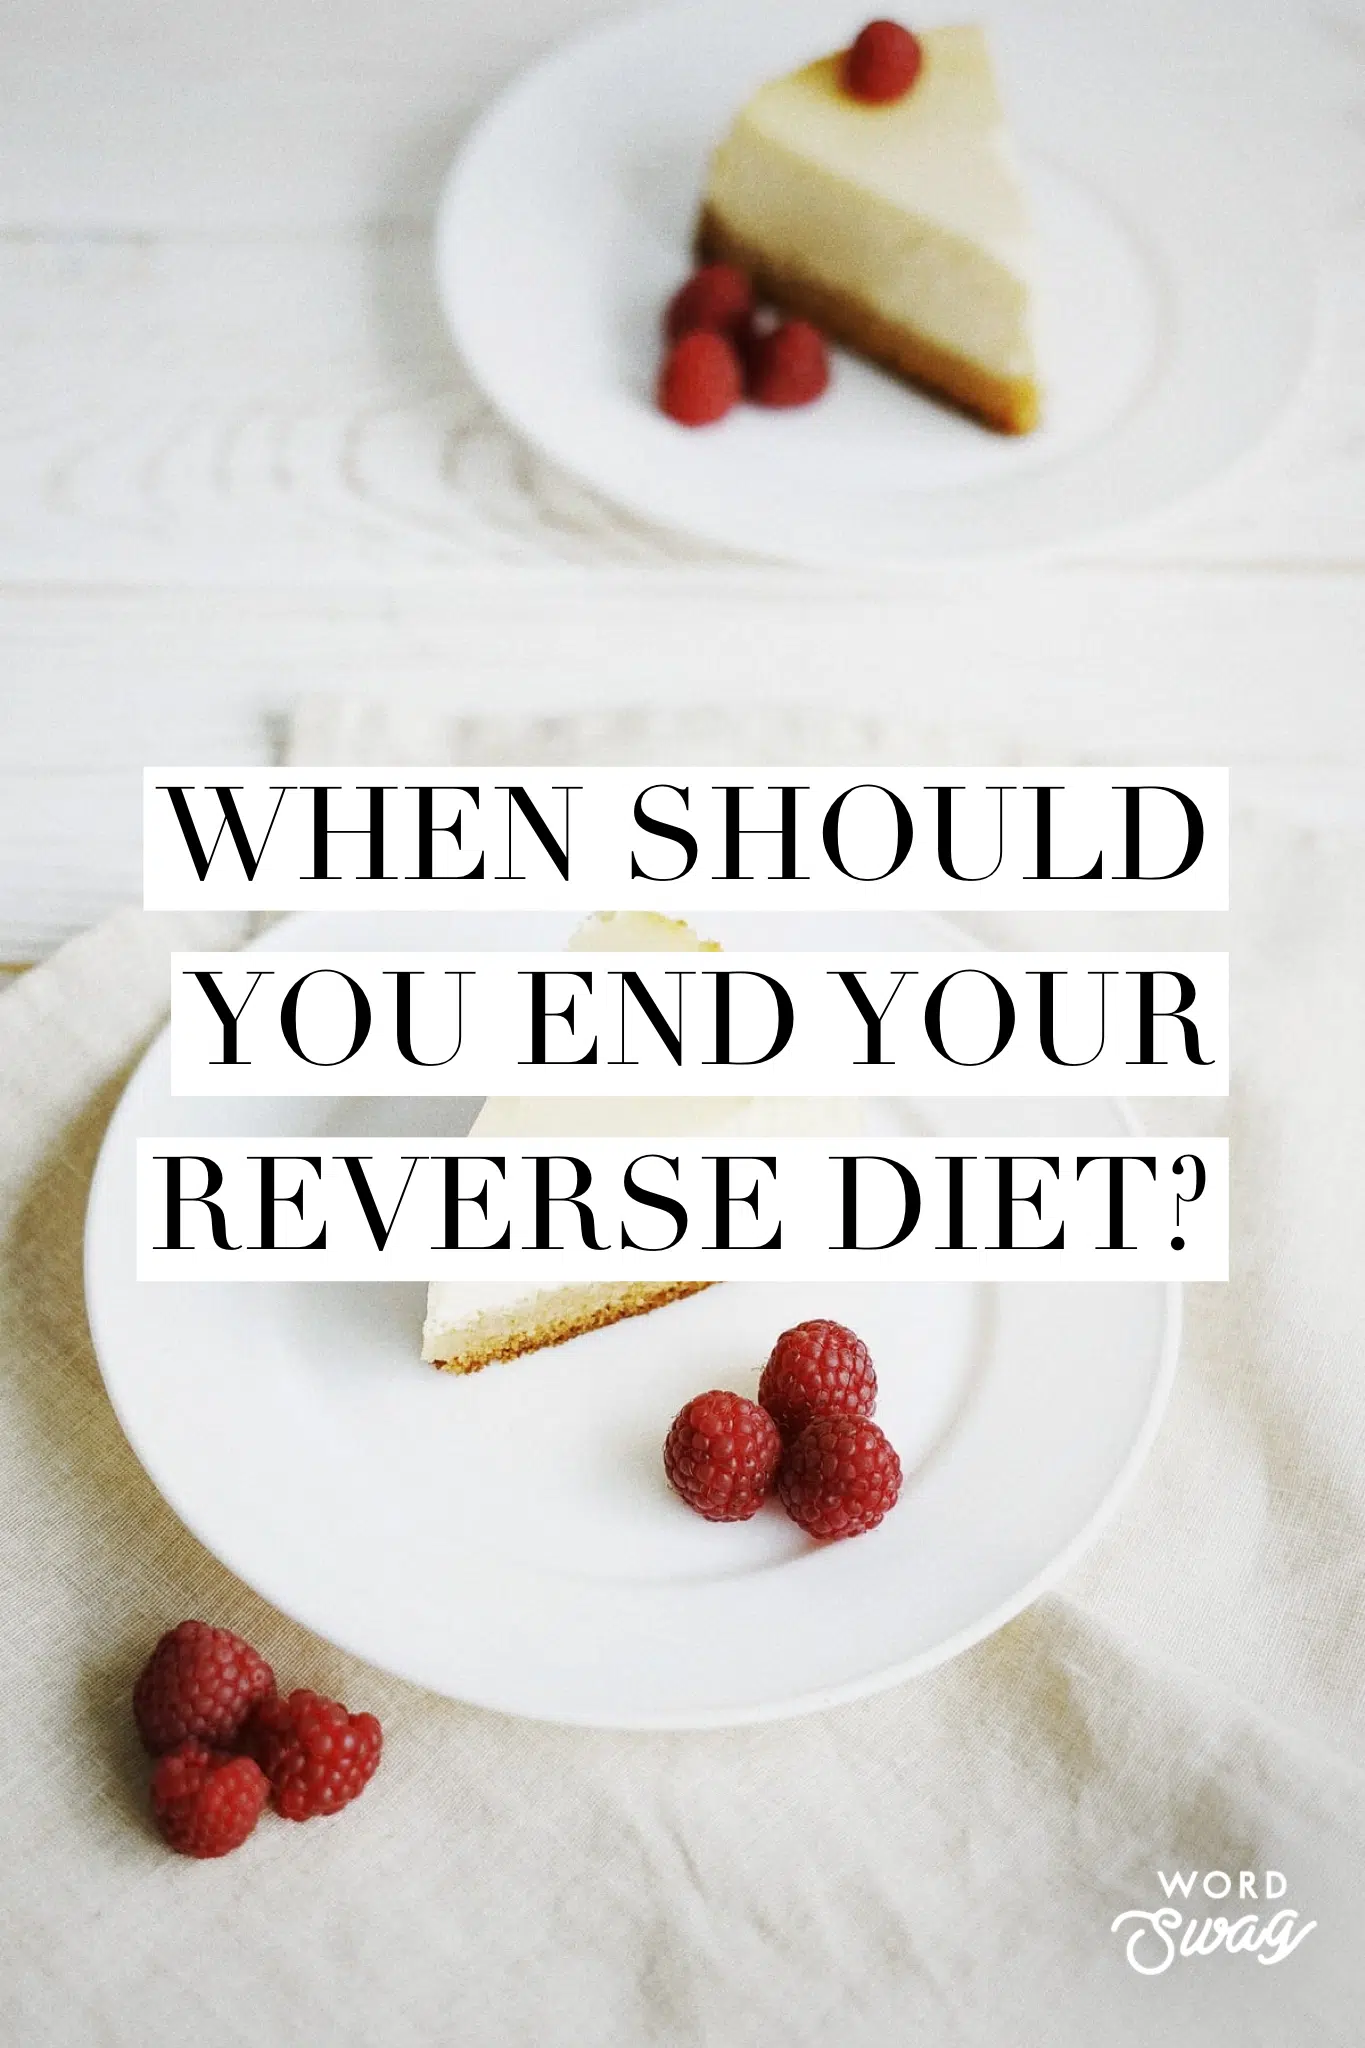 When should you end your reverse diet?